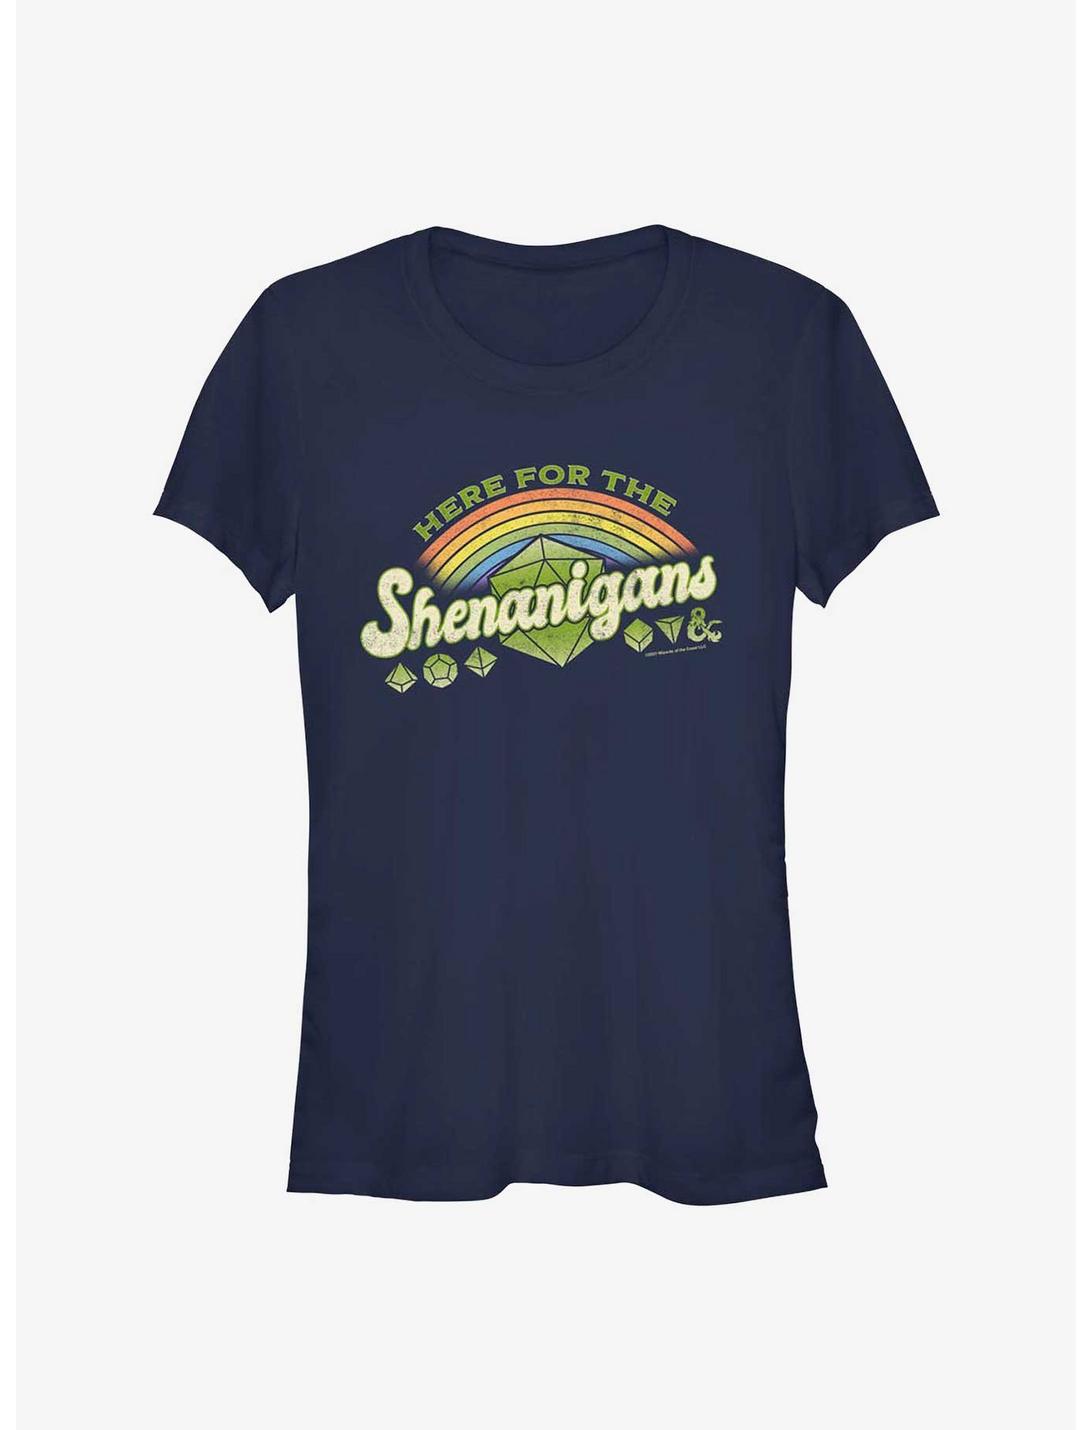 Dungeons And Dragons Here For Shenanigans Girls T-Shirt, NAVY, hi-res